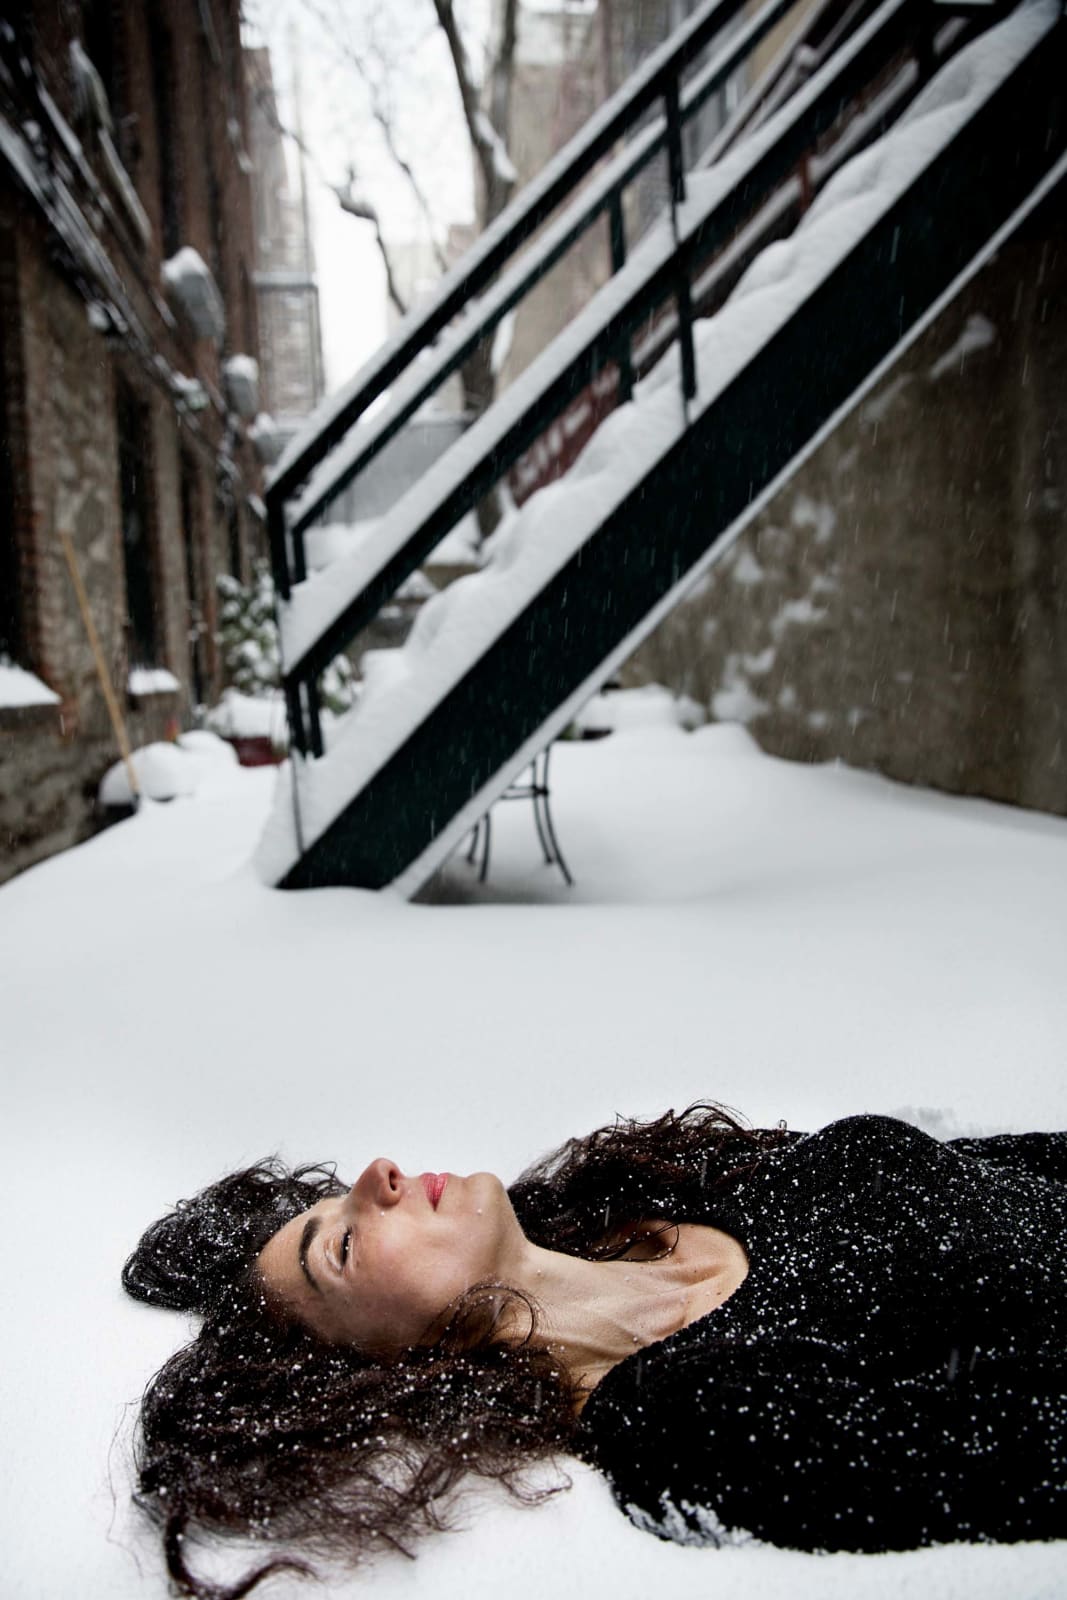 Elinor Carucci photograph of the artist laying in the snow in front of the stairs to an apartment building